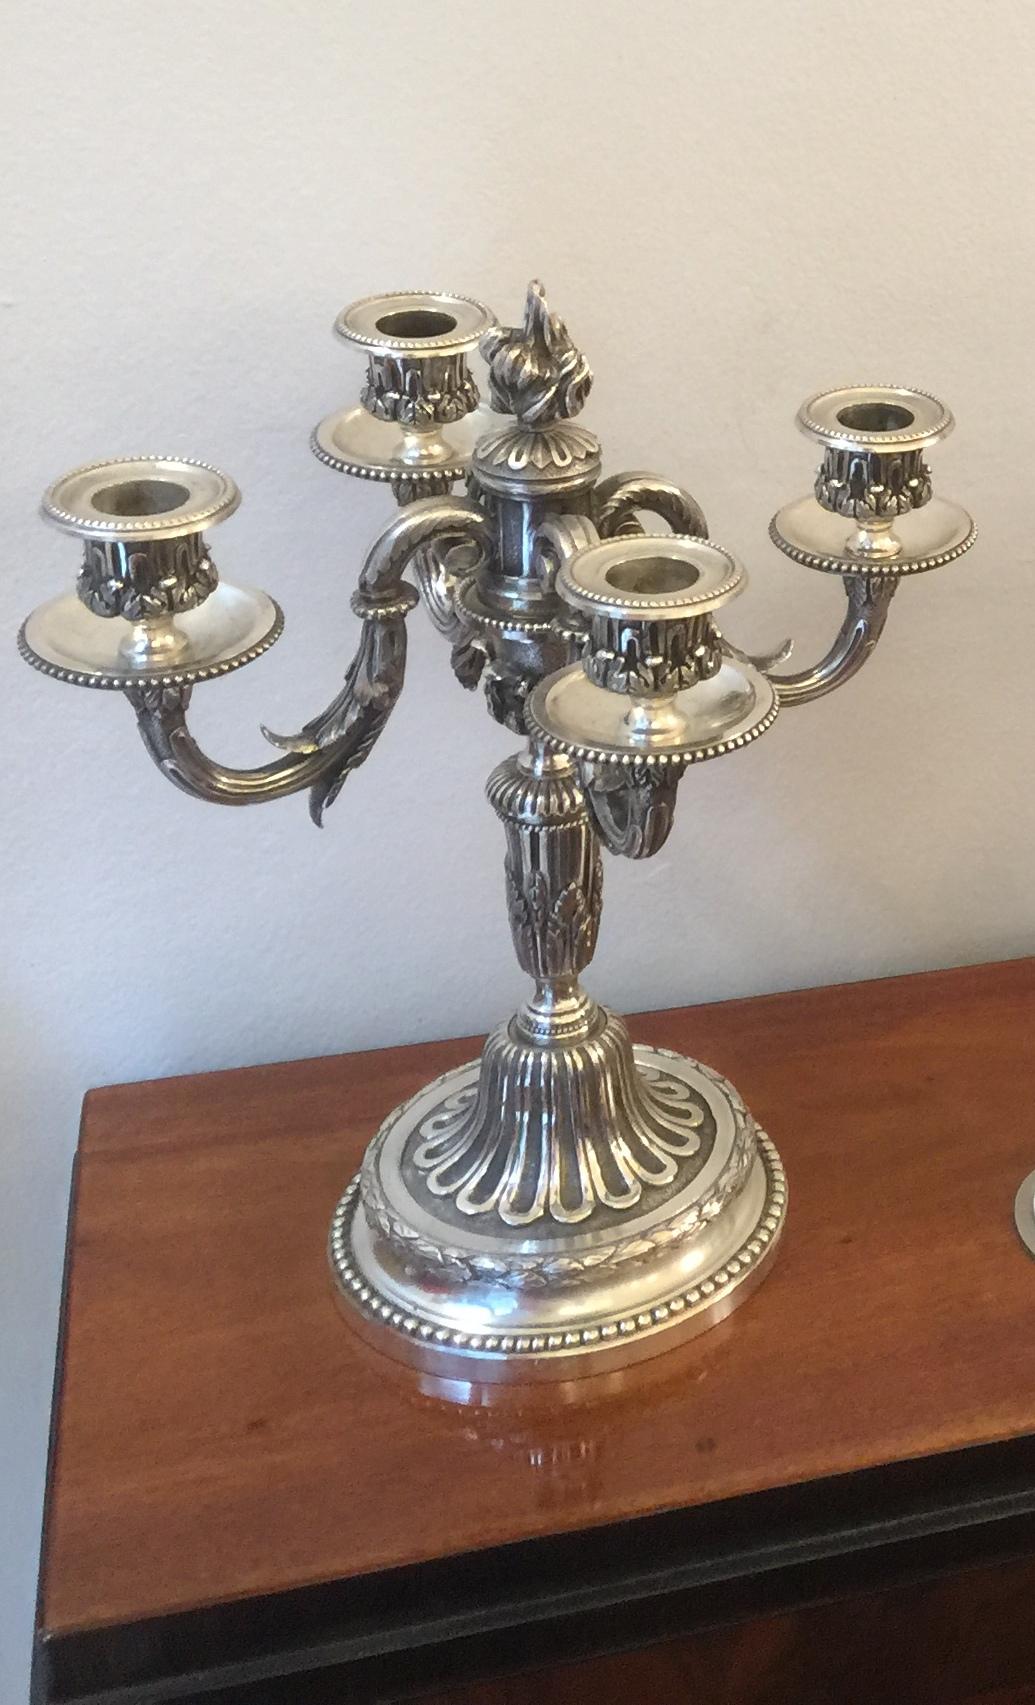 Pair of Candelabras
Sign: Made in France
Jugendstil, Art Nouveau, Liberty
We have specialized in the sale of Art Deco and Art Nouveau and Vintage styles since 1982. If you have any questions we are at your disposal.
Pushing the button that reads